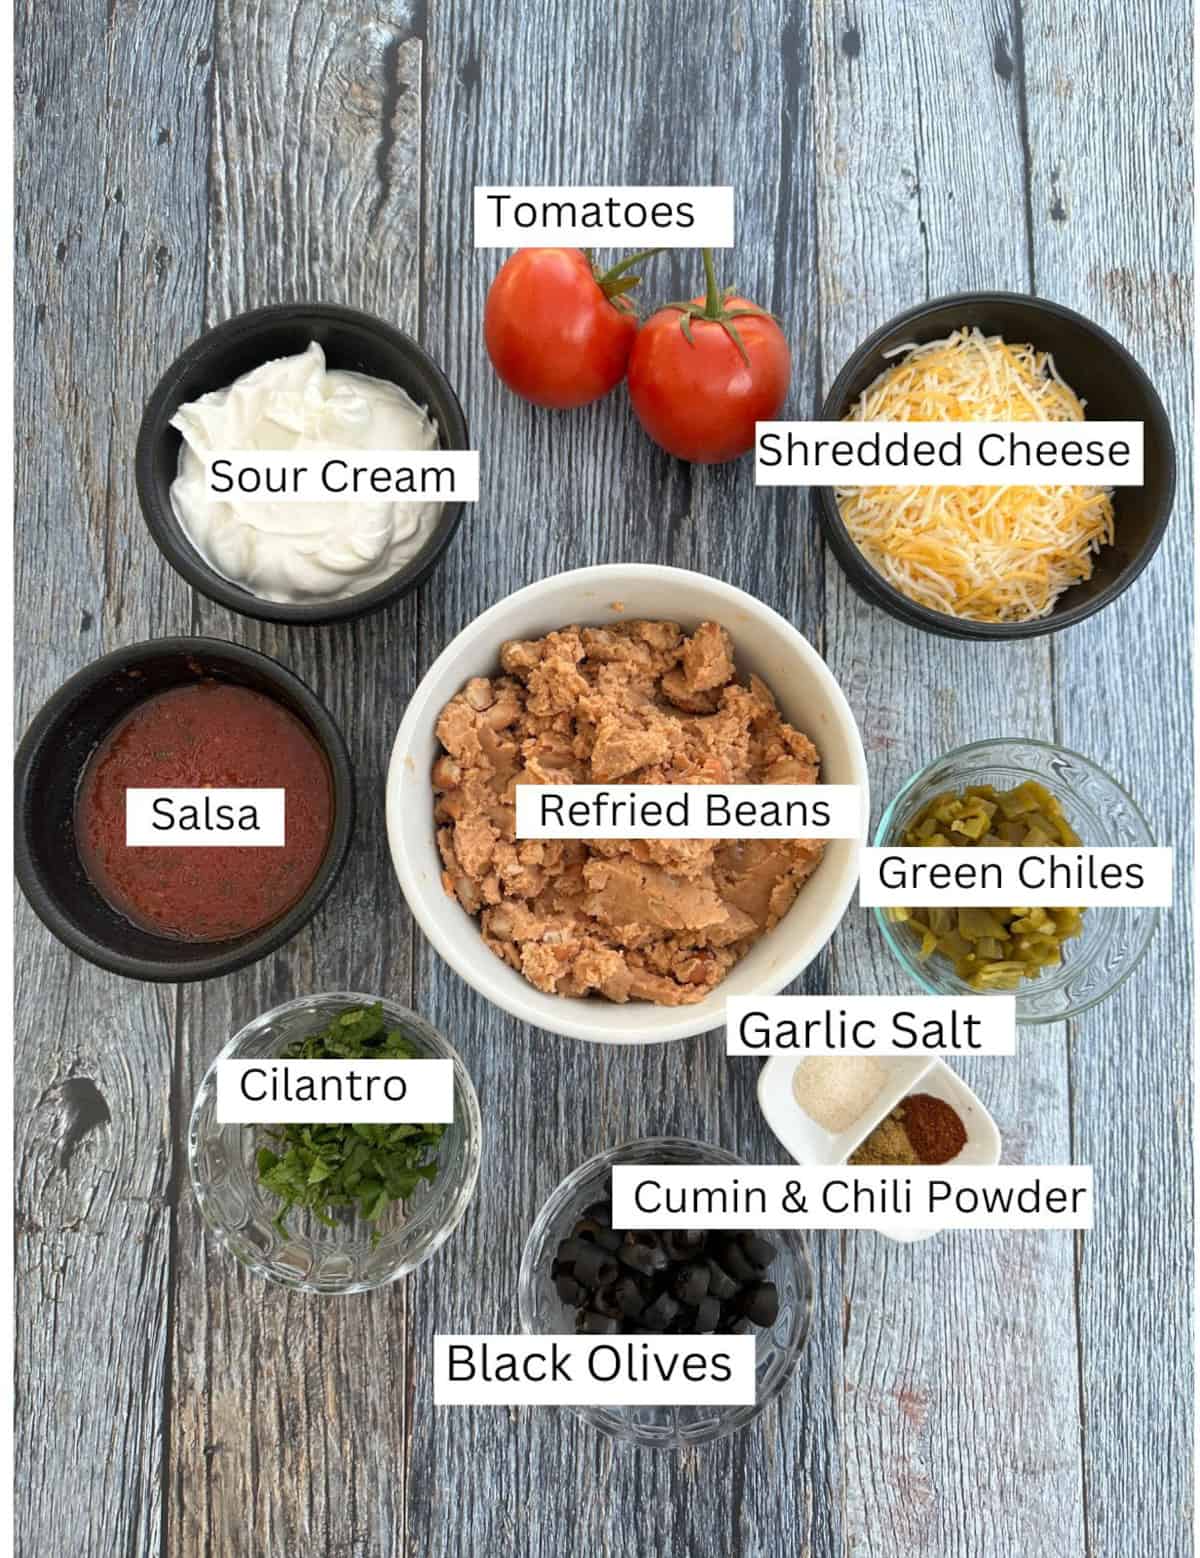 Labeled ingredients for five-layer taco dip on a wooden table.